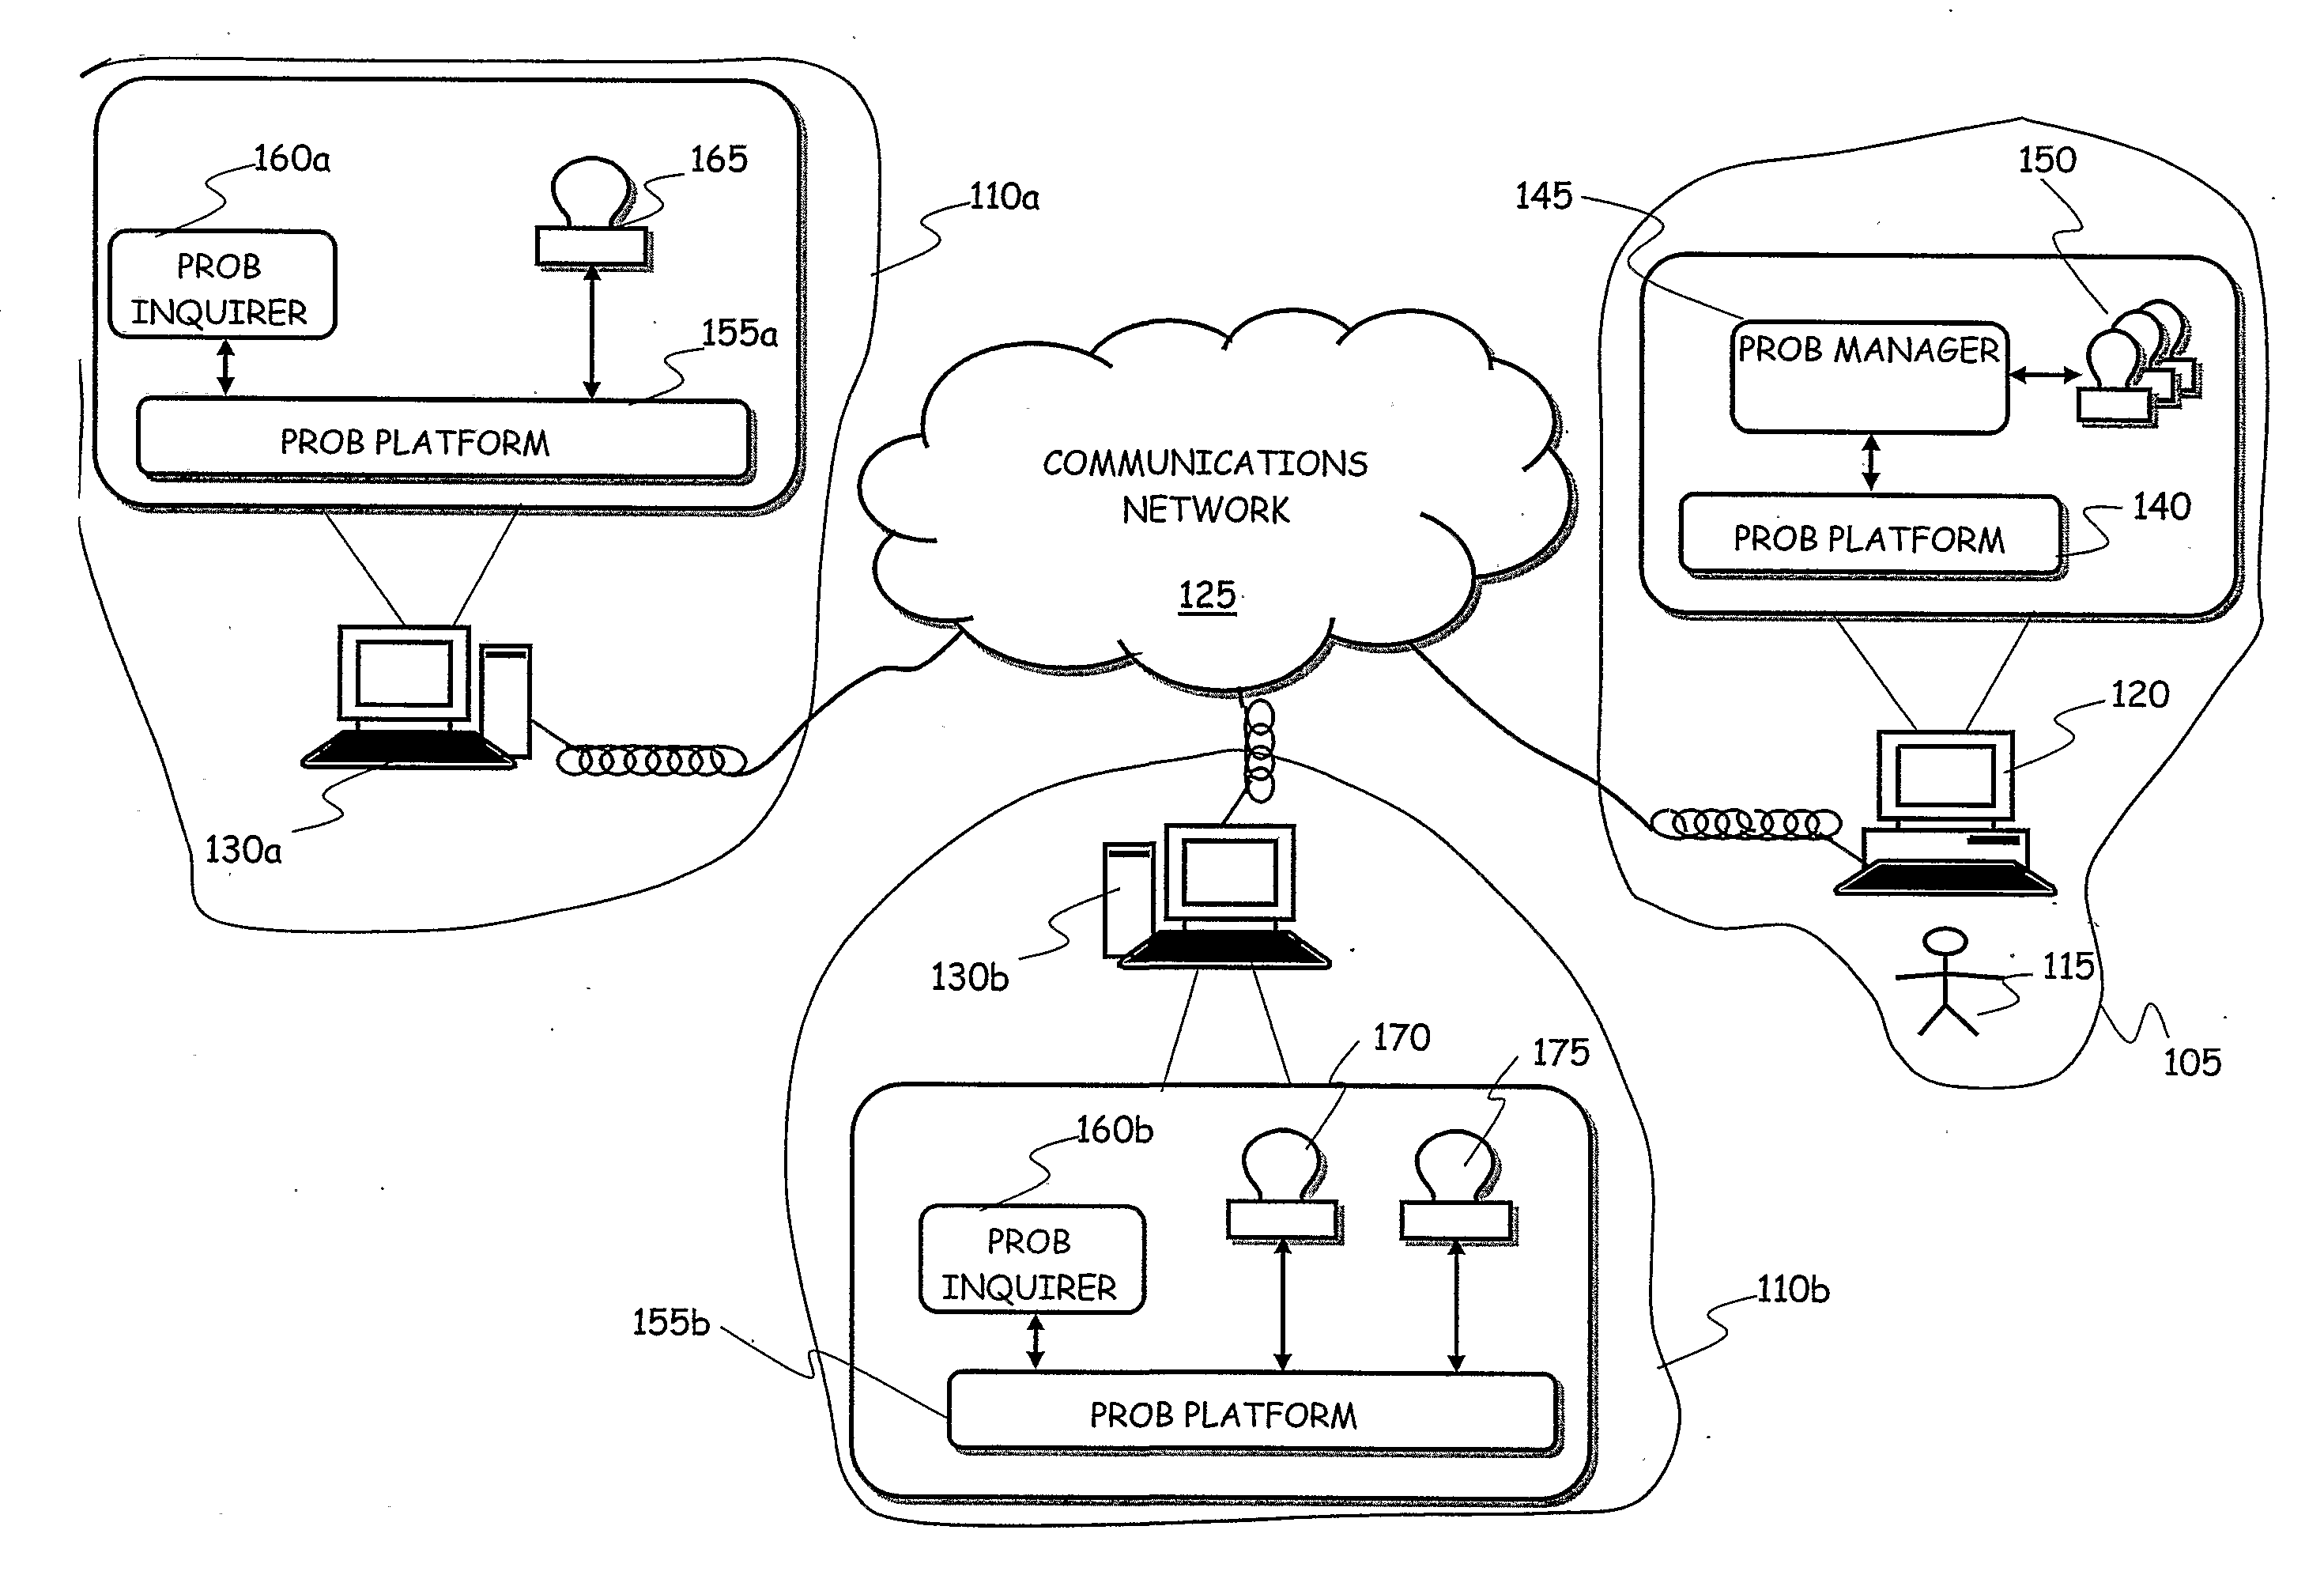 Method and System for Protected Distribution of Digitalized Sensitive Information